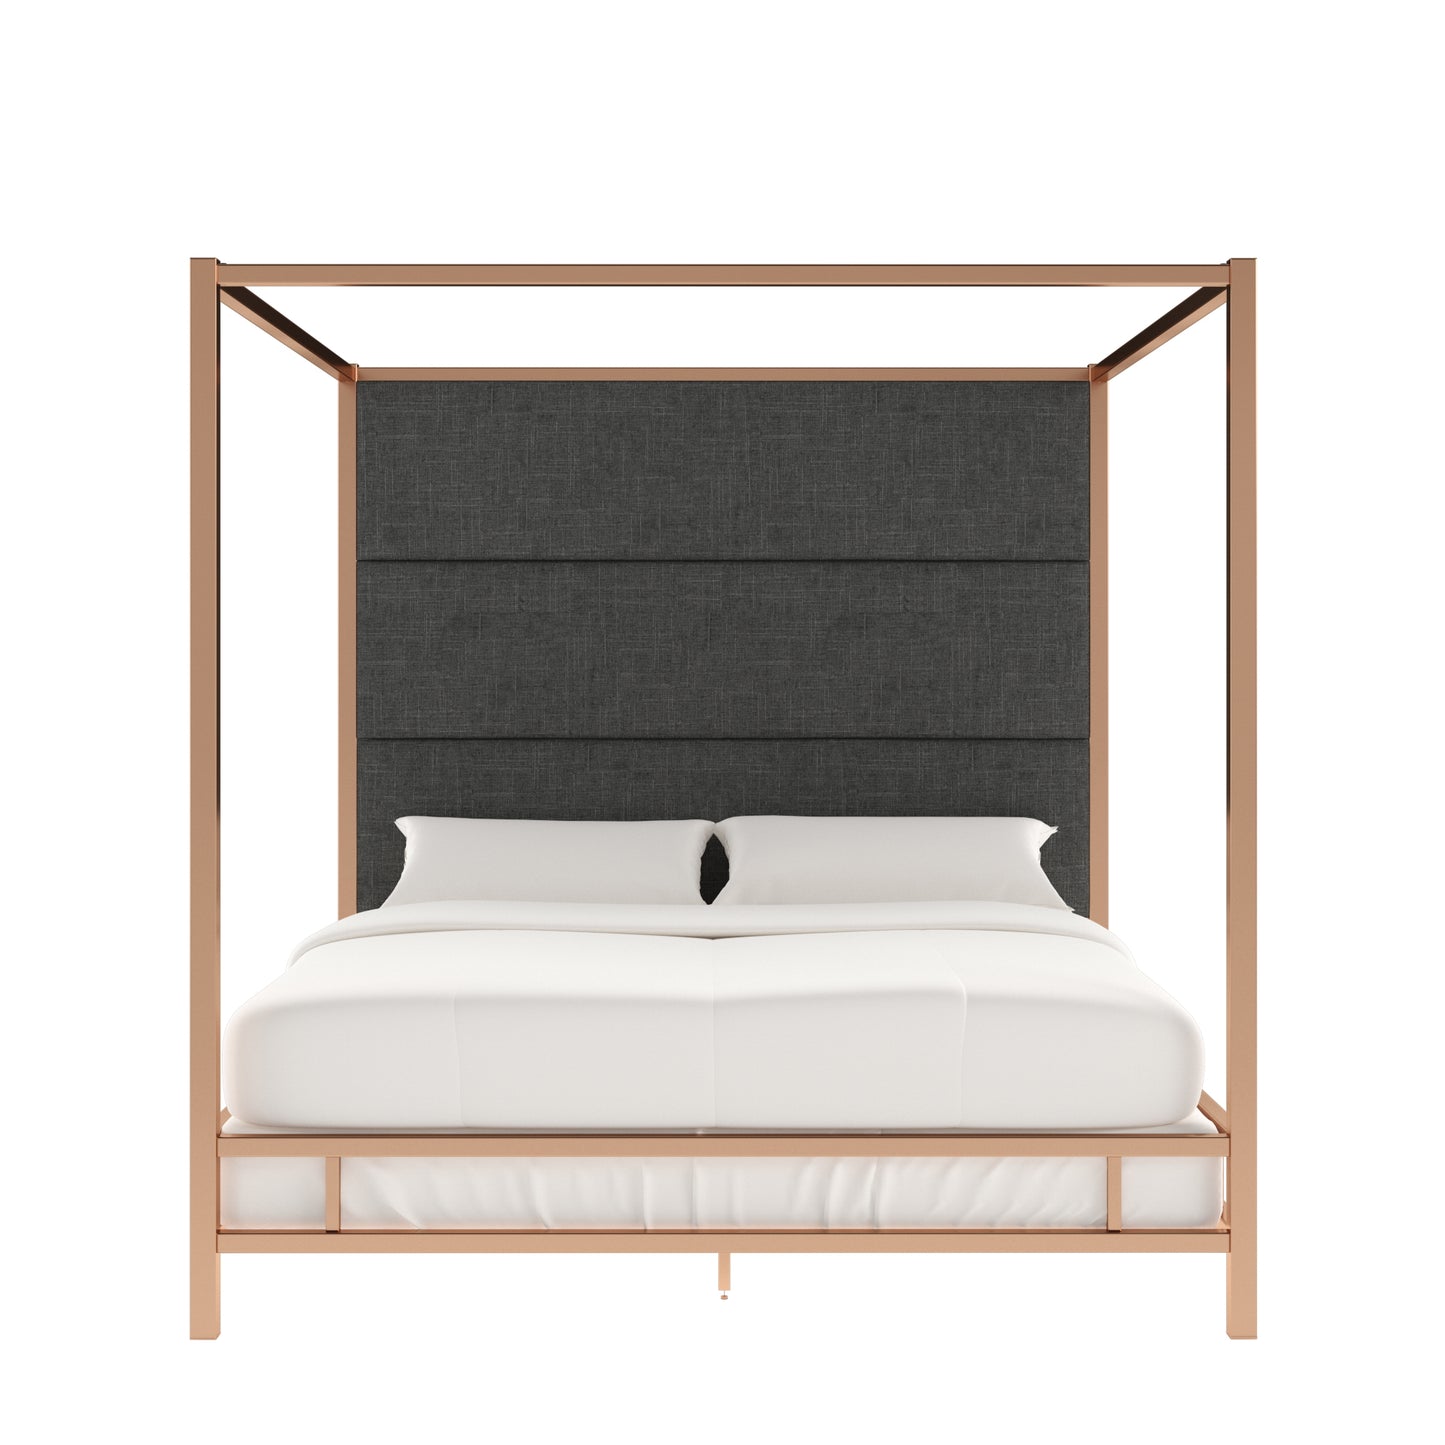 Metal Canopy Bed with Linen Panel Headboard - Dark Grey Linen, Champagne Gold Finish, King Size